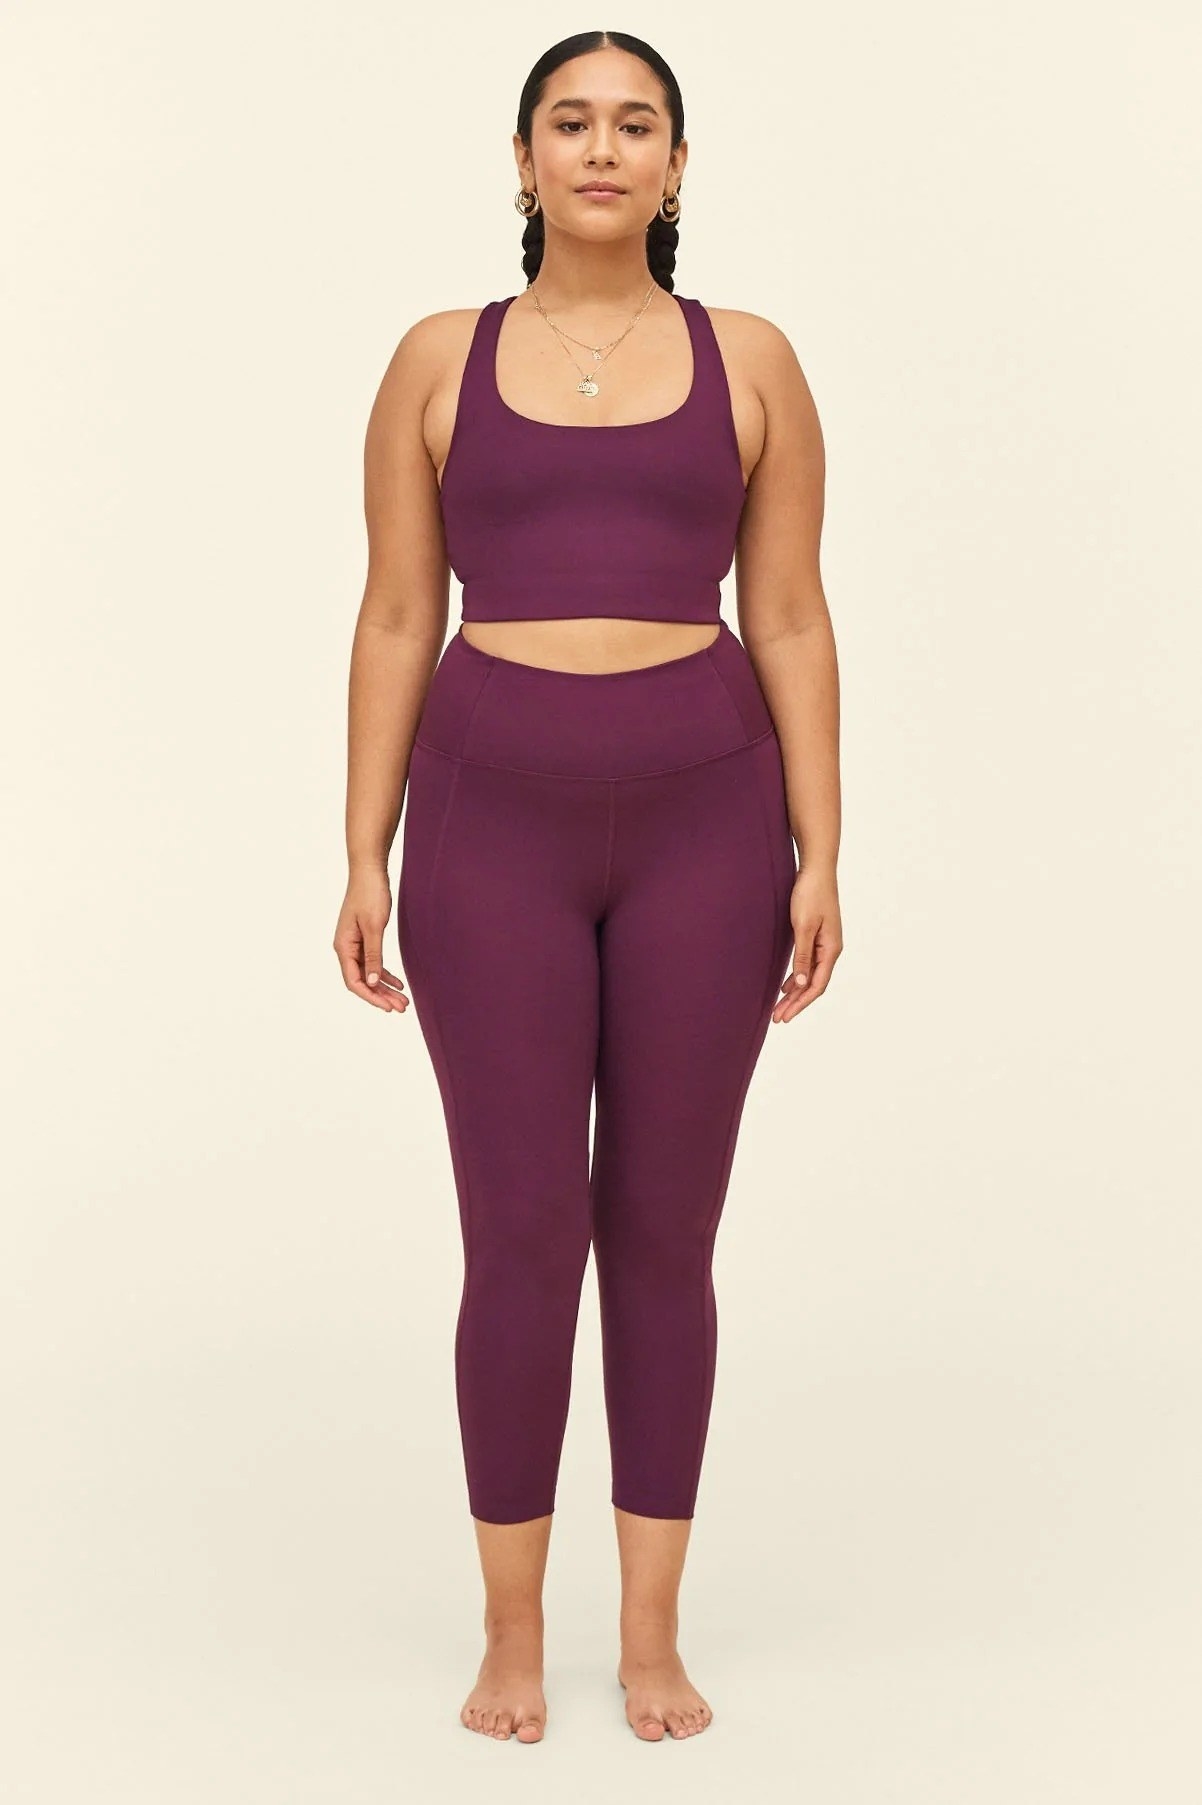 model wearing the high-waist stretch leggings in a purple color